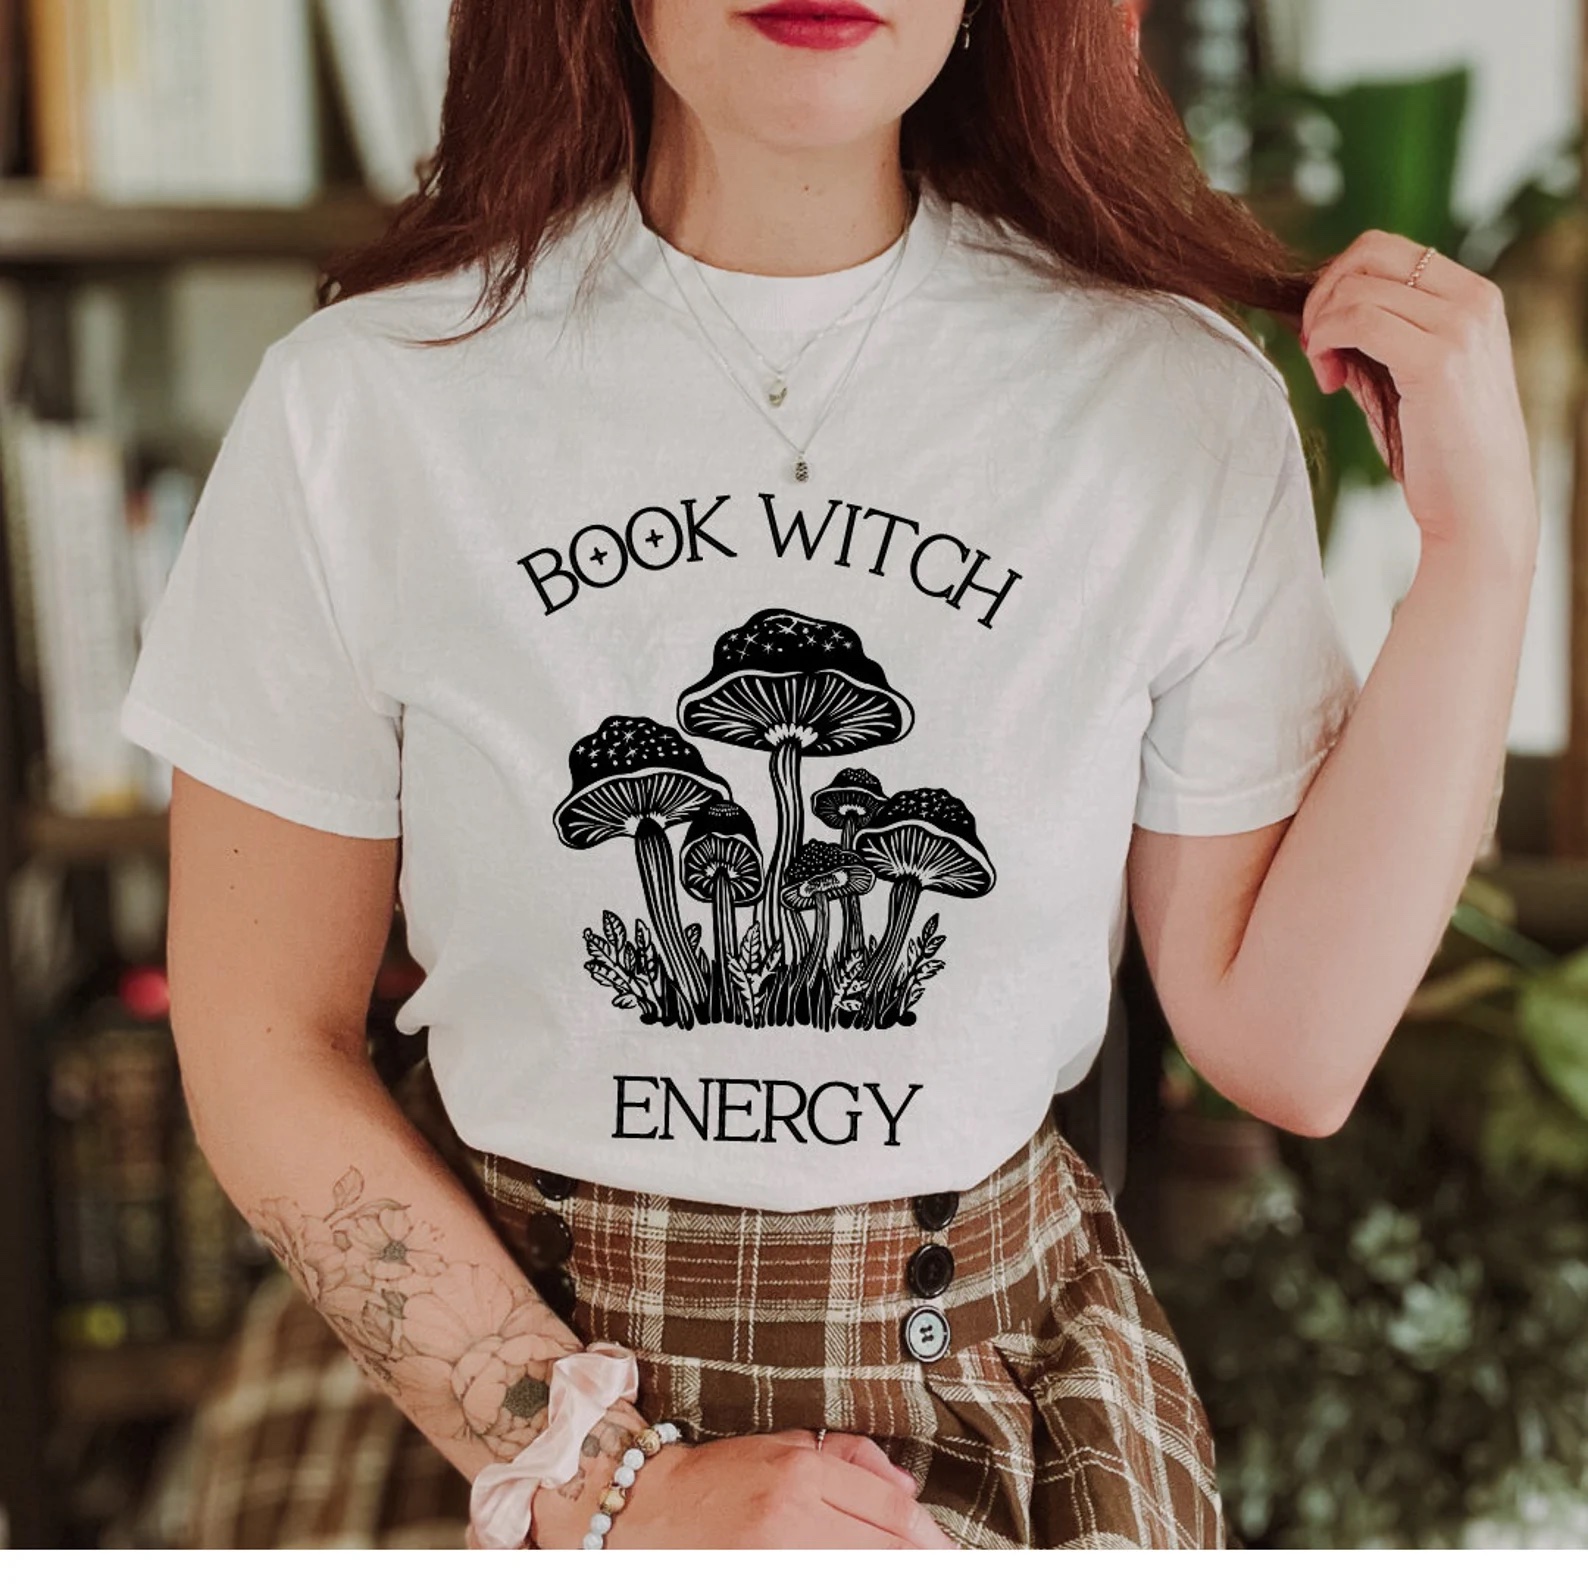 a photo of a white woman wearing an off-white shirt that says "Book Witch Energy"